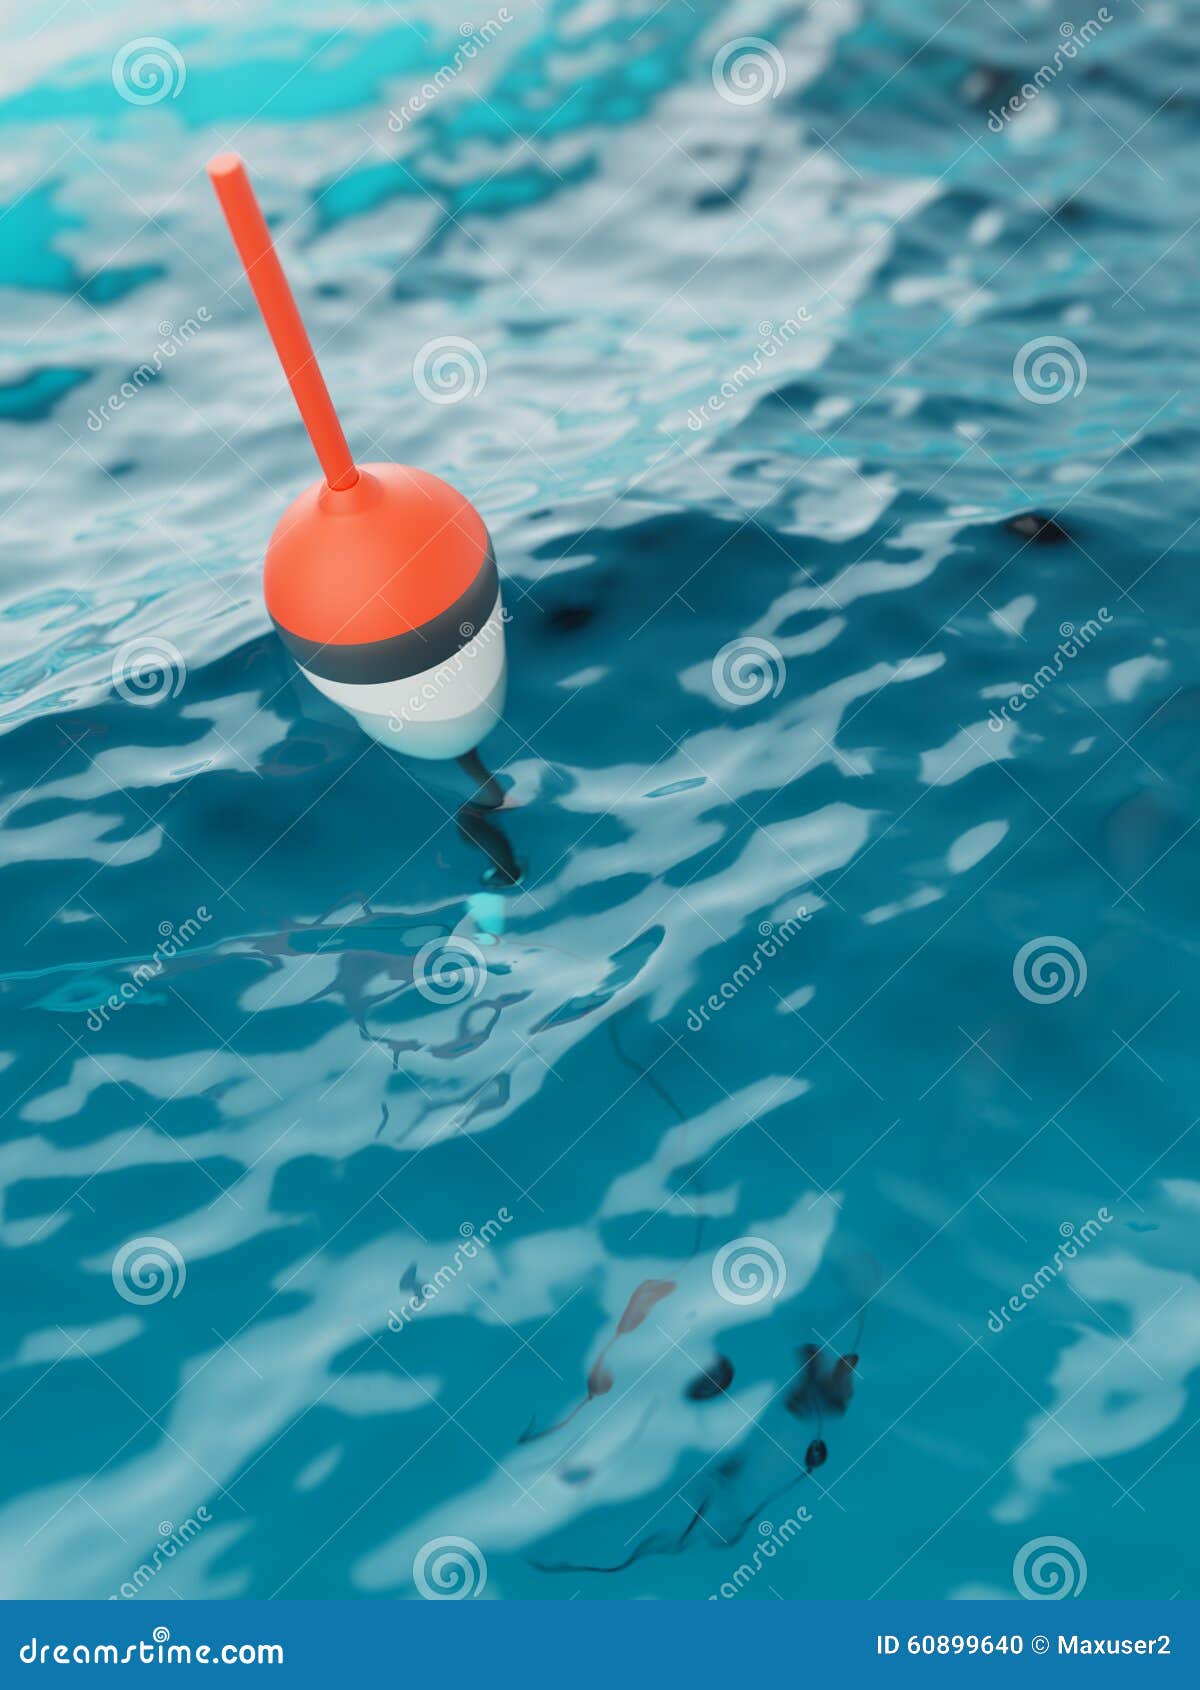 Bobber on water surface stock photo. Image of surface - 60899640